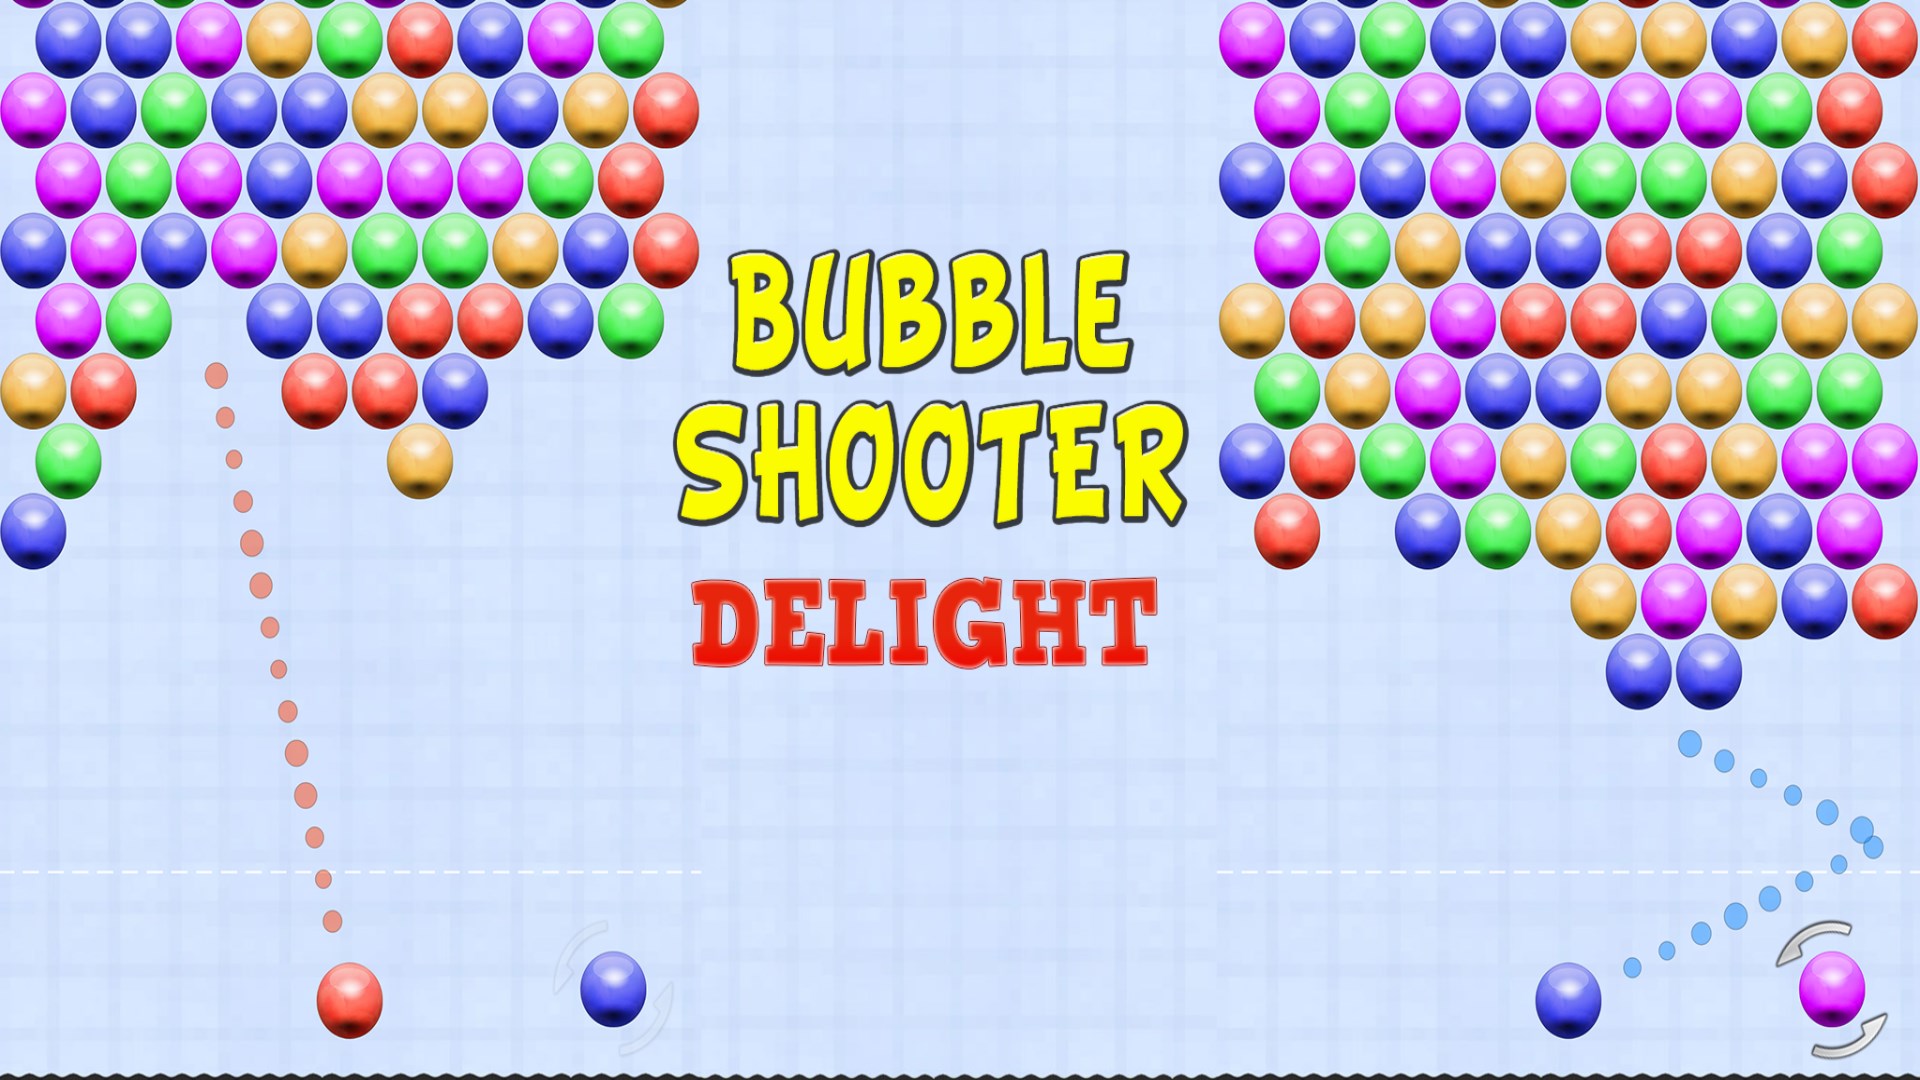 Get Bubble Shooter Delight